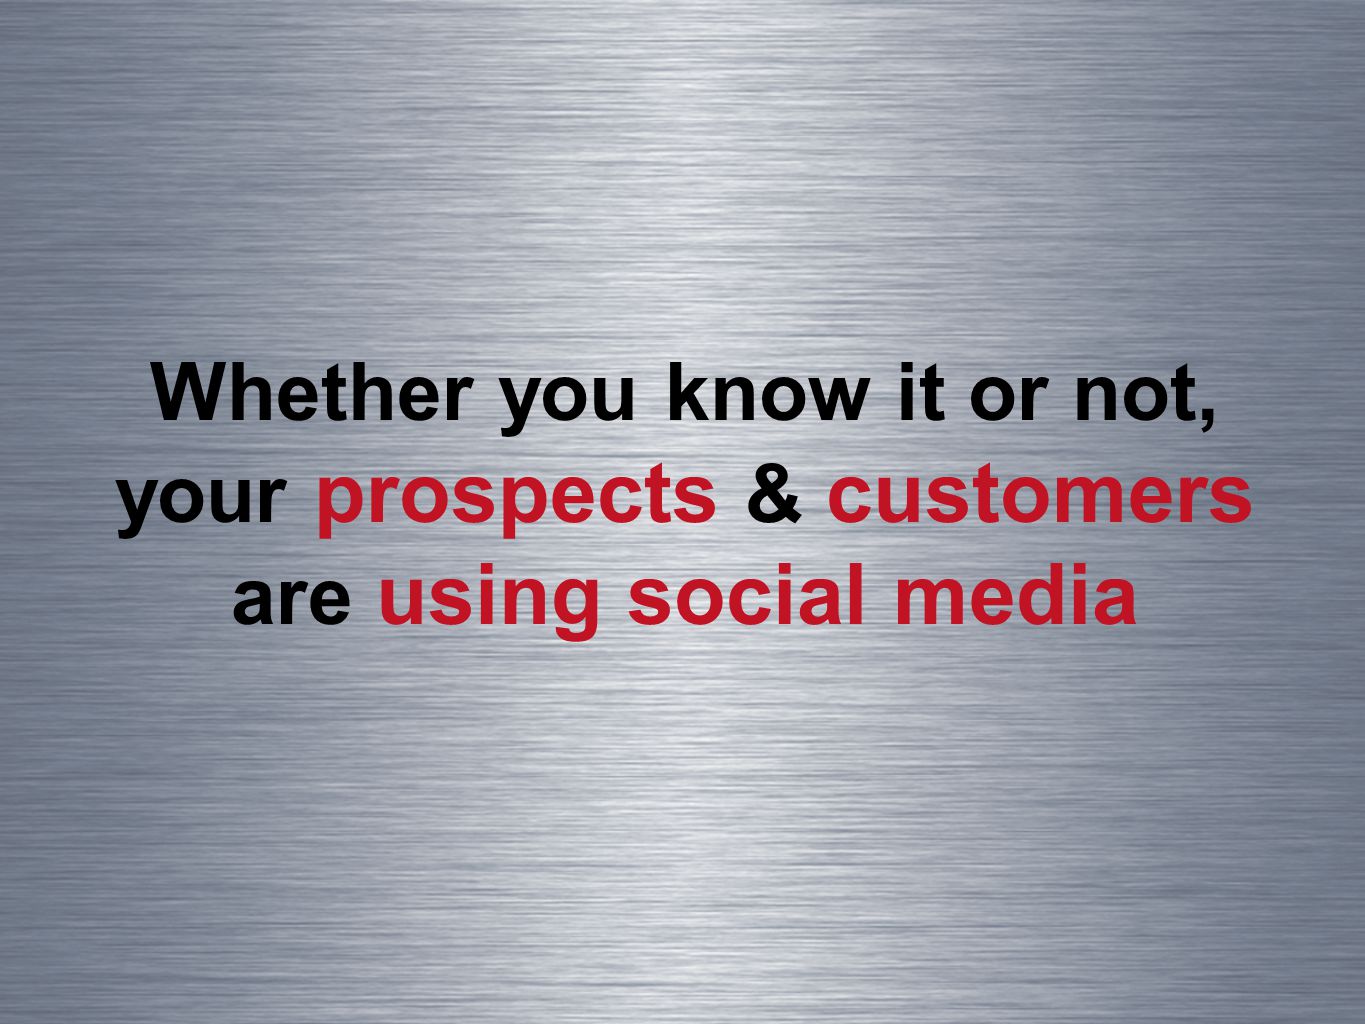 Whether you know it or not, your prospects & customers are using social media